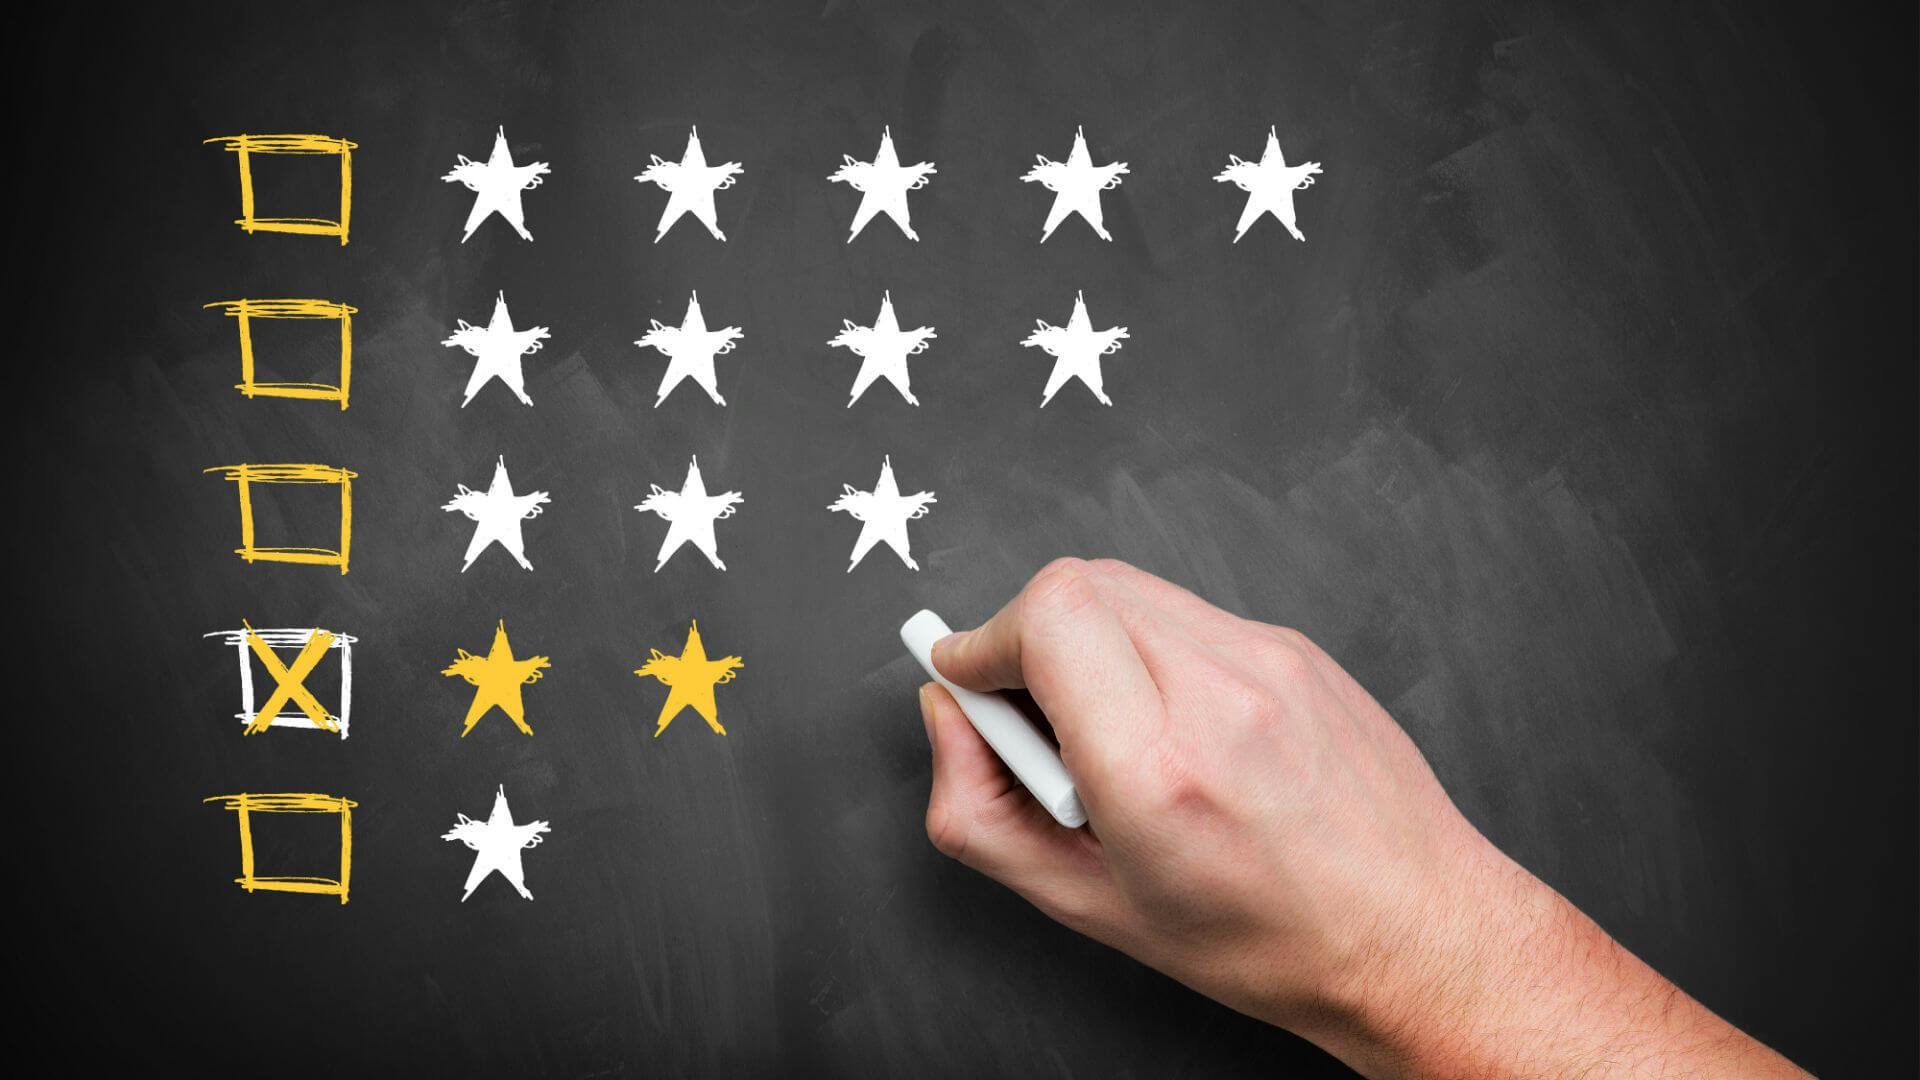 SEO reputation management through reviews and such